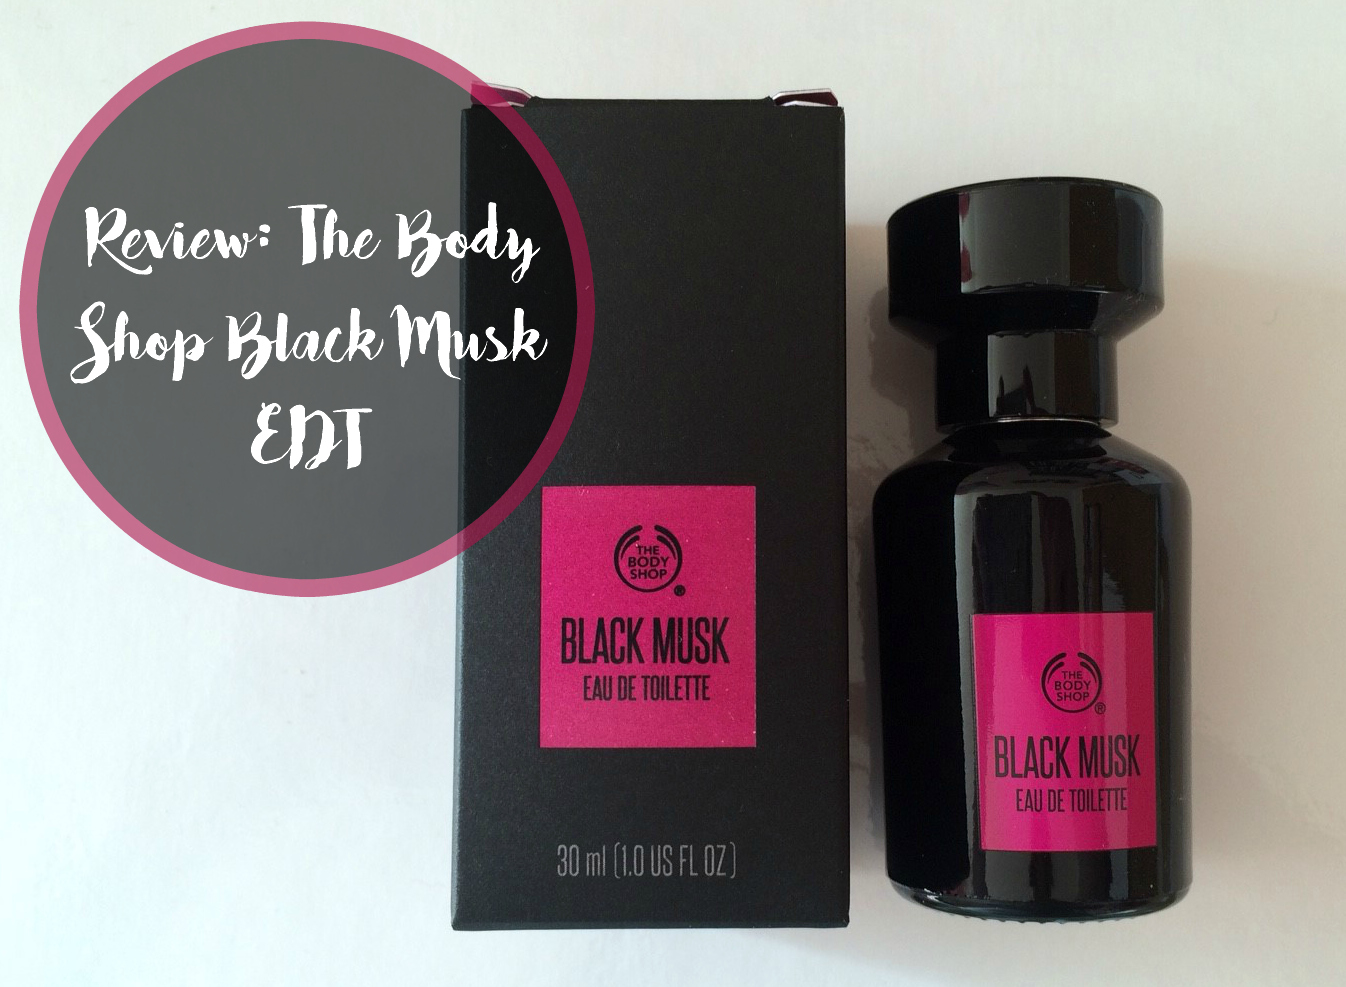 the body shop black musk body mist review